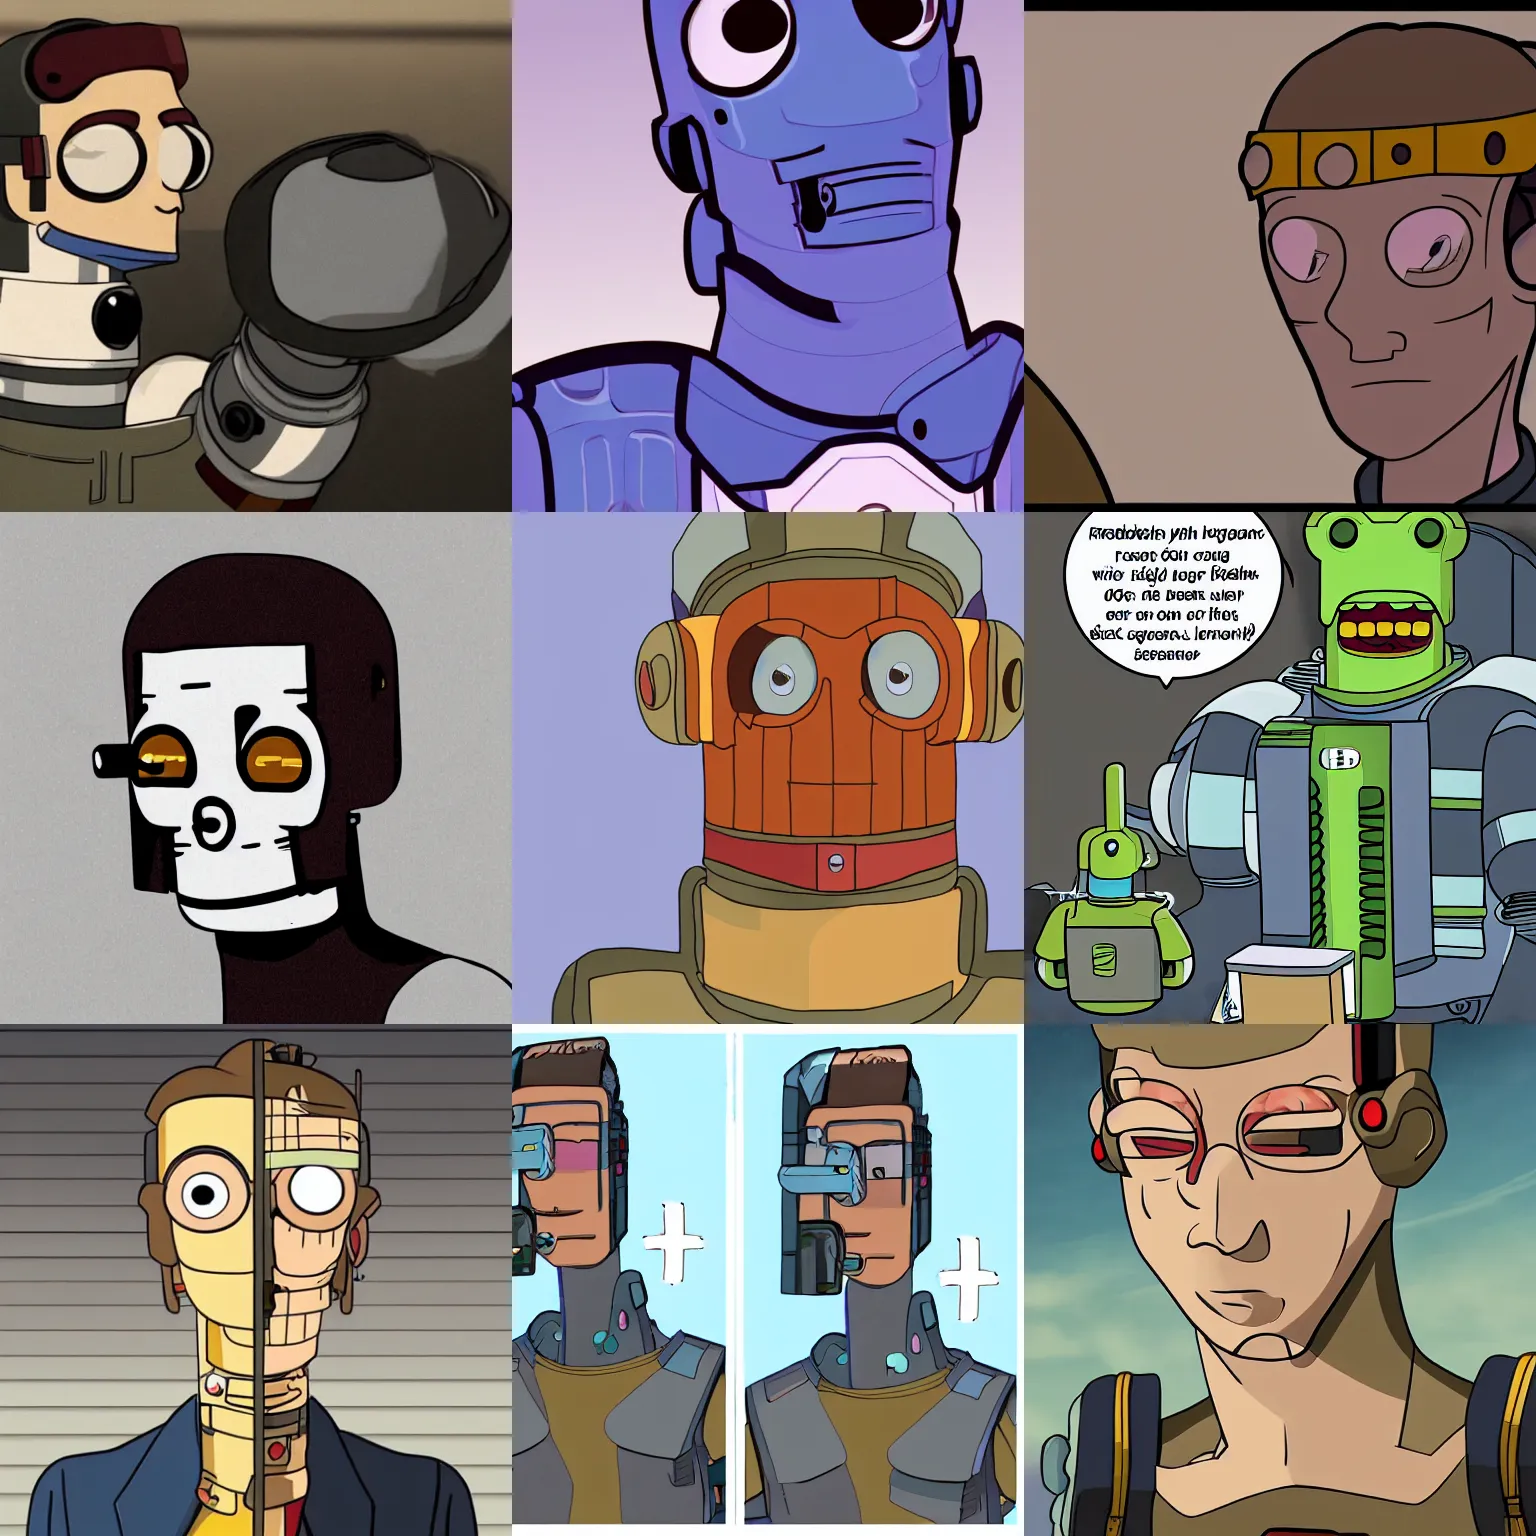 Prompt: bender from. futurama, removing his robot mask, revealing mark zuckerberg's face.